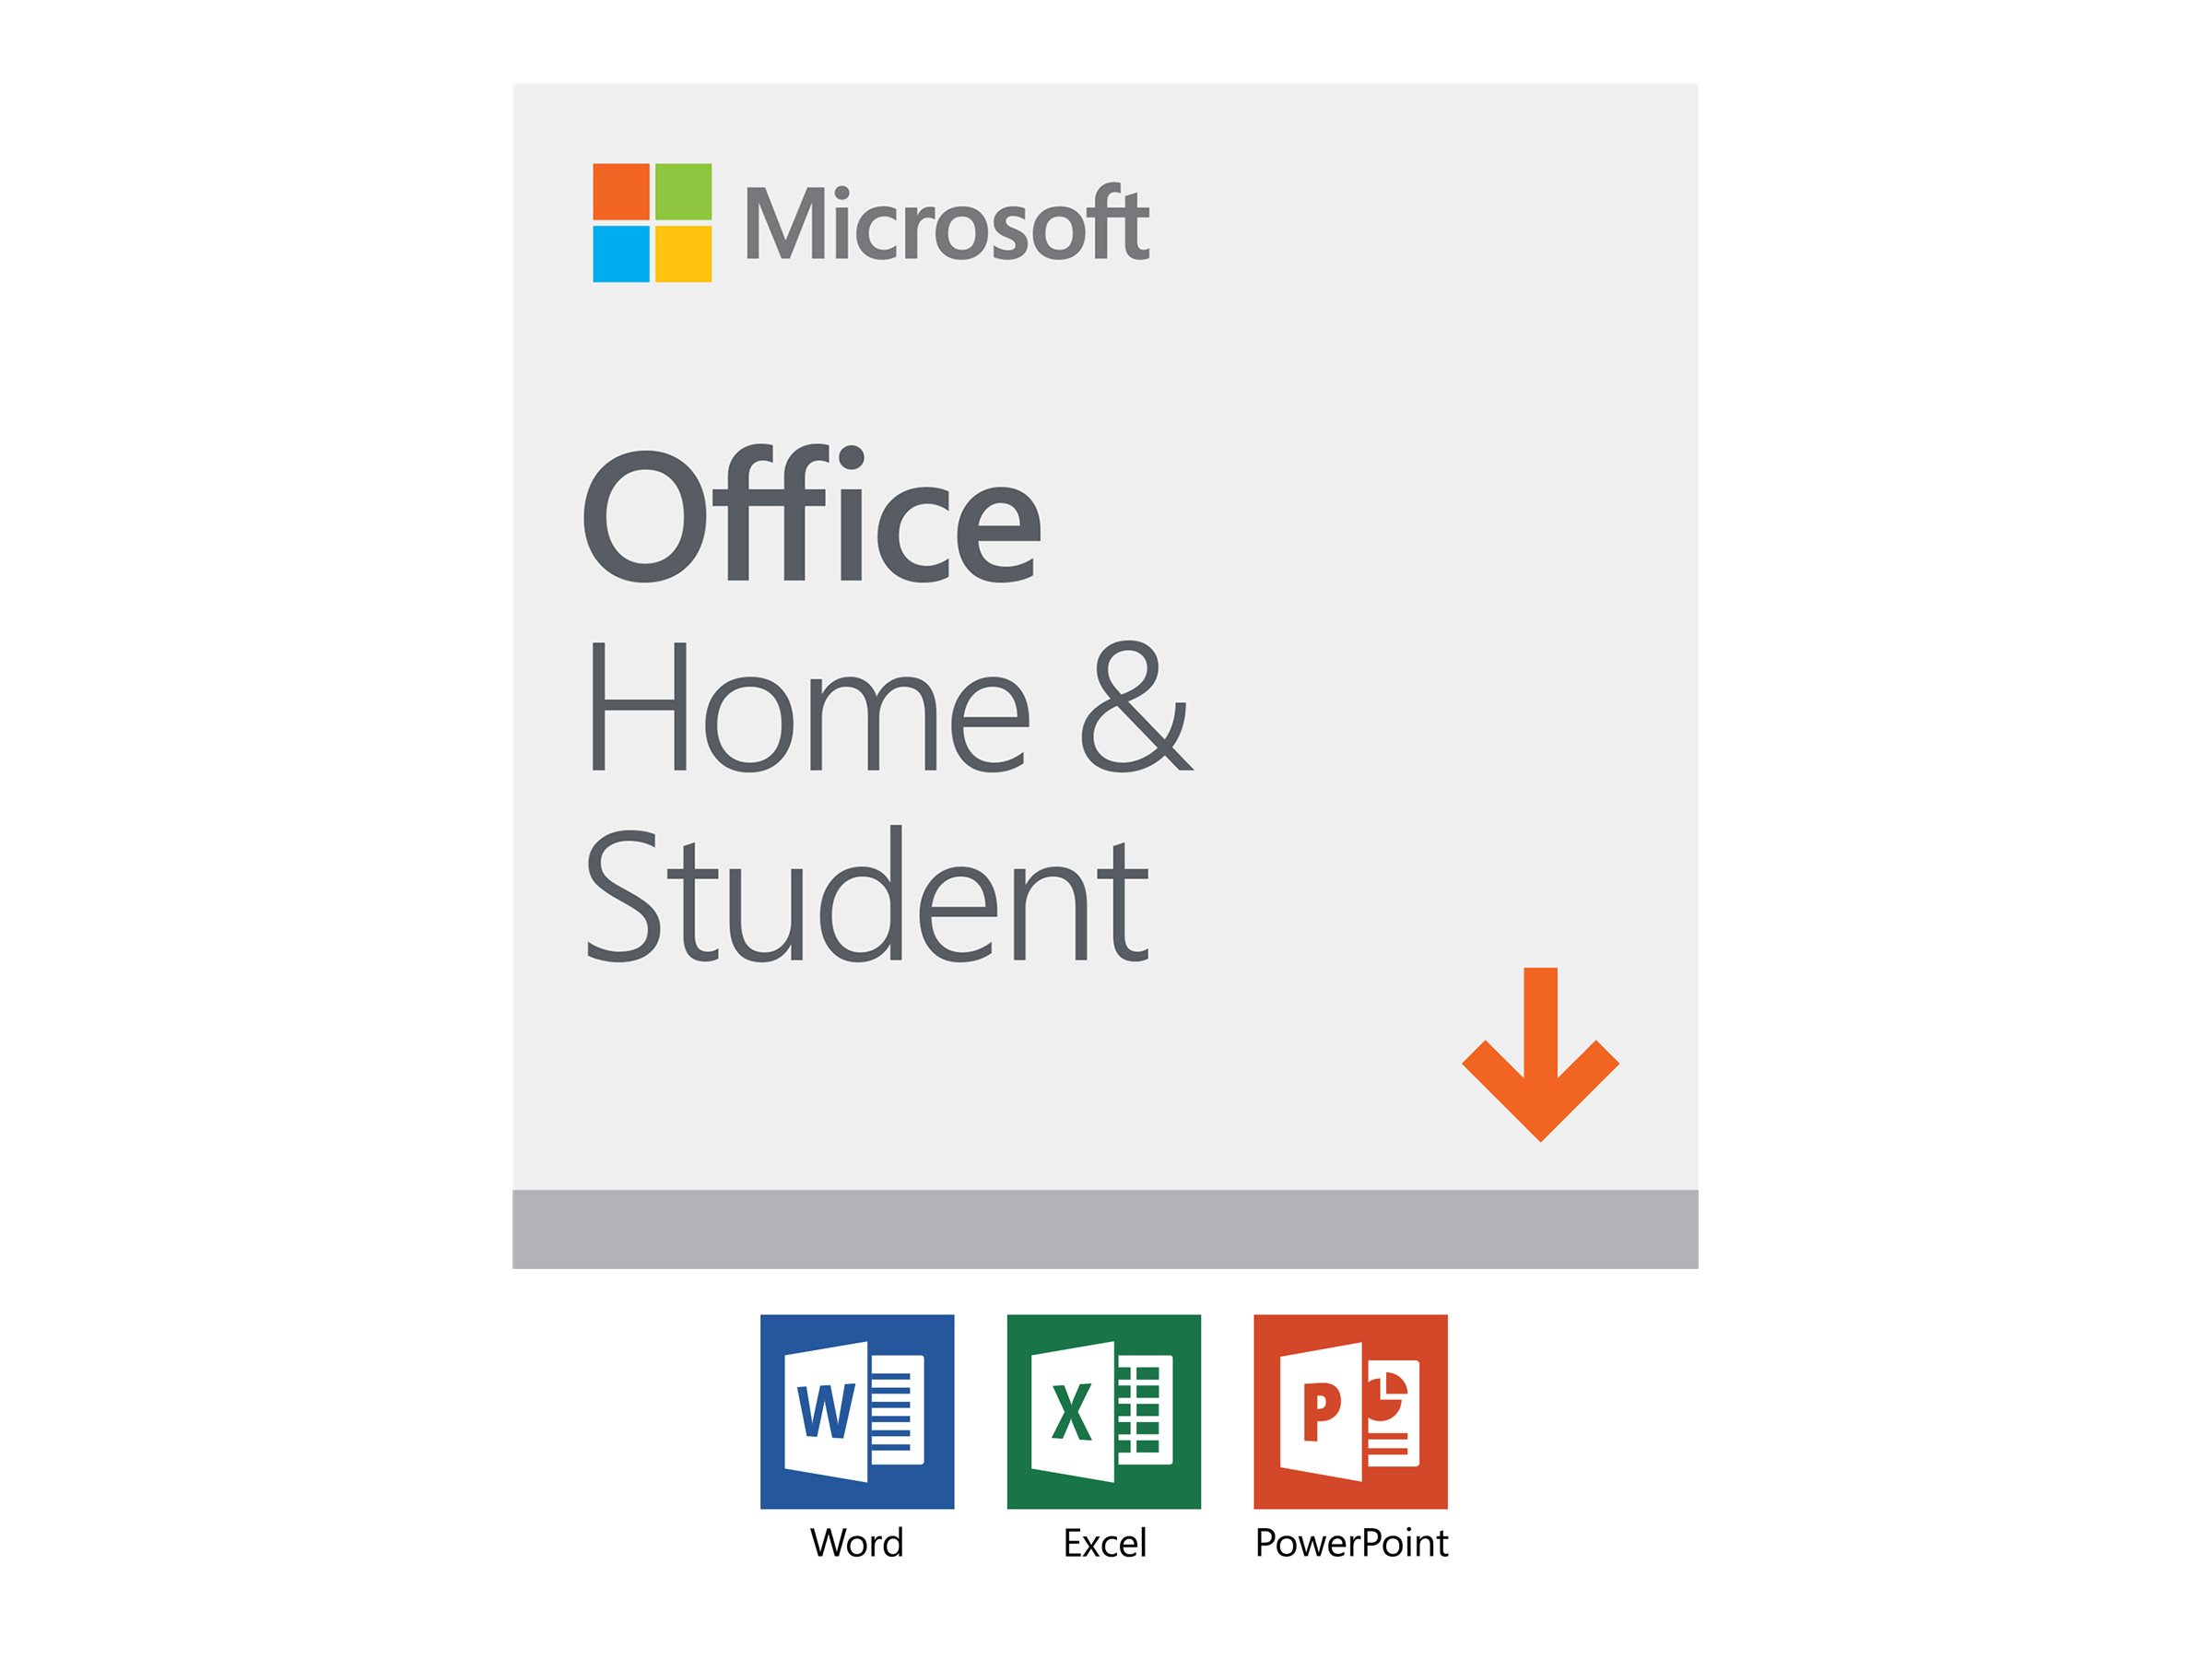 Microsoft Office Home and Student 2019 | www.shi.com